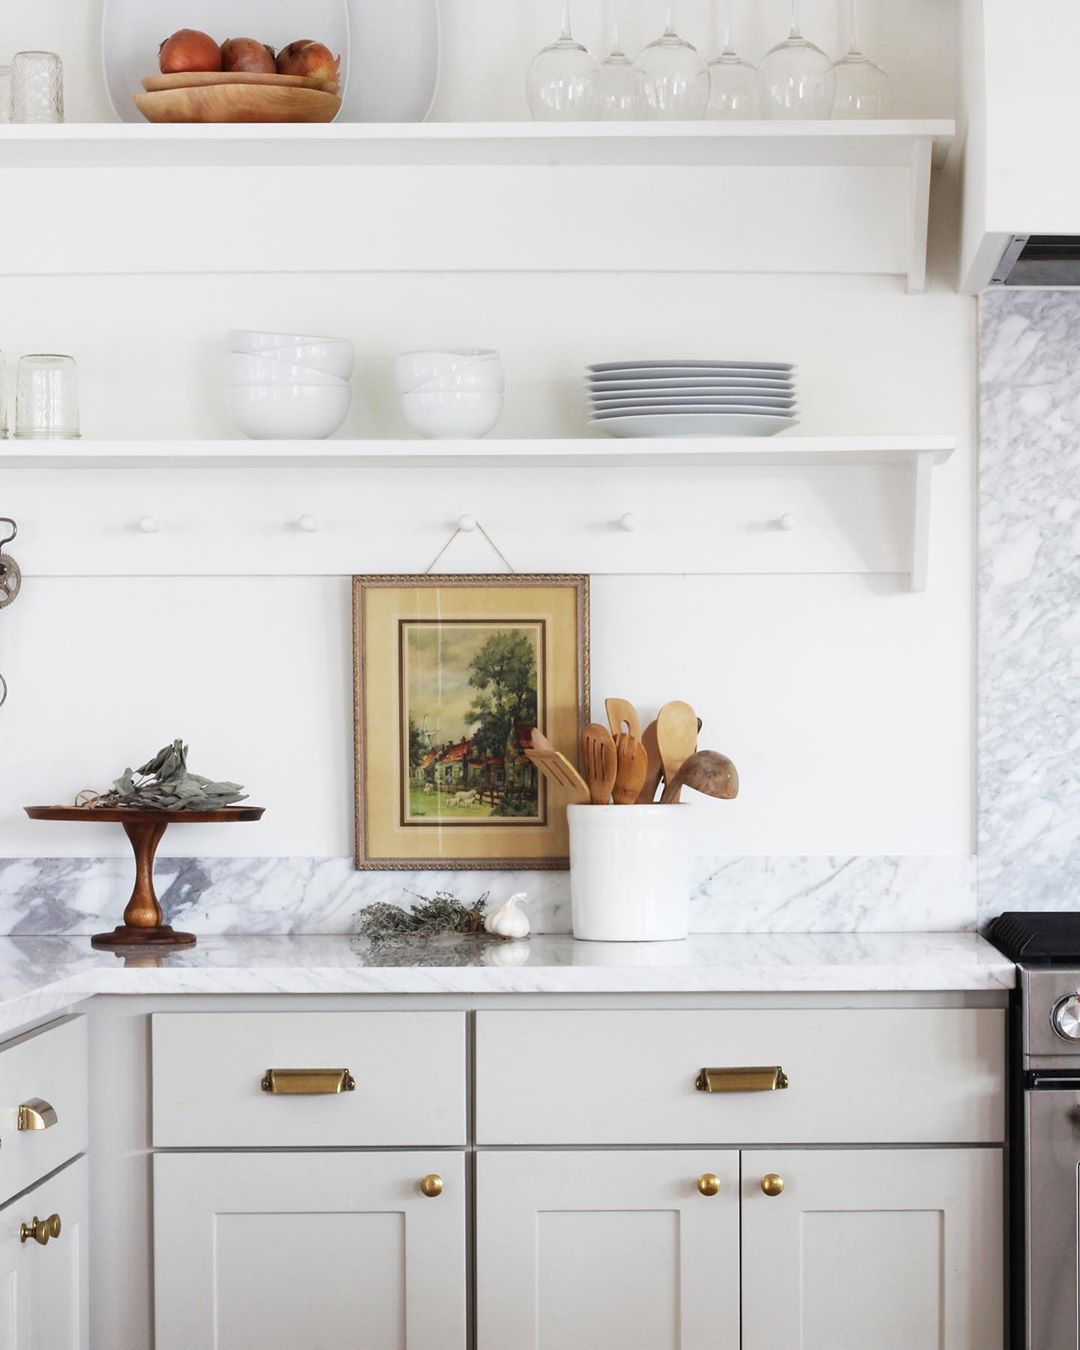 Kitchen with walls and floating shelves holding white dishes. Photo by Instagram user @thegritandpolish